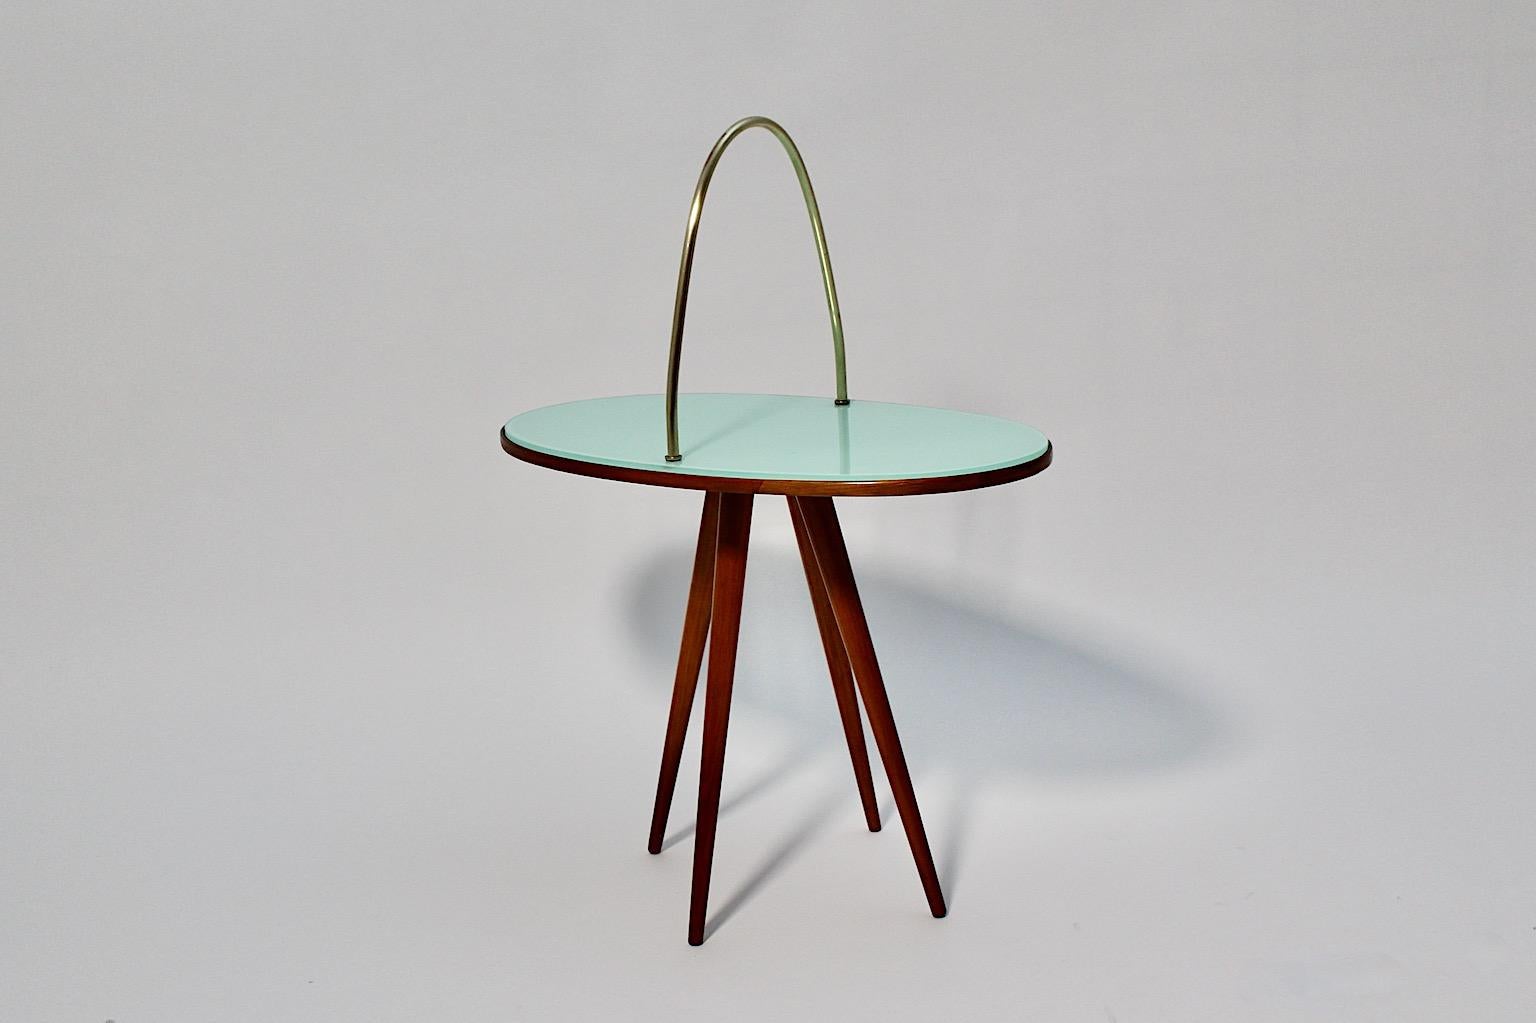 Mid-Century Modern Vintage oval side table from cherrywood, green glass and brass 1950s Italy.
An amazing side table or coffee table from shellac polished cherrywood topped with a green glass plate and a nice brass handle.
This wonderful green